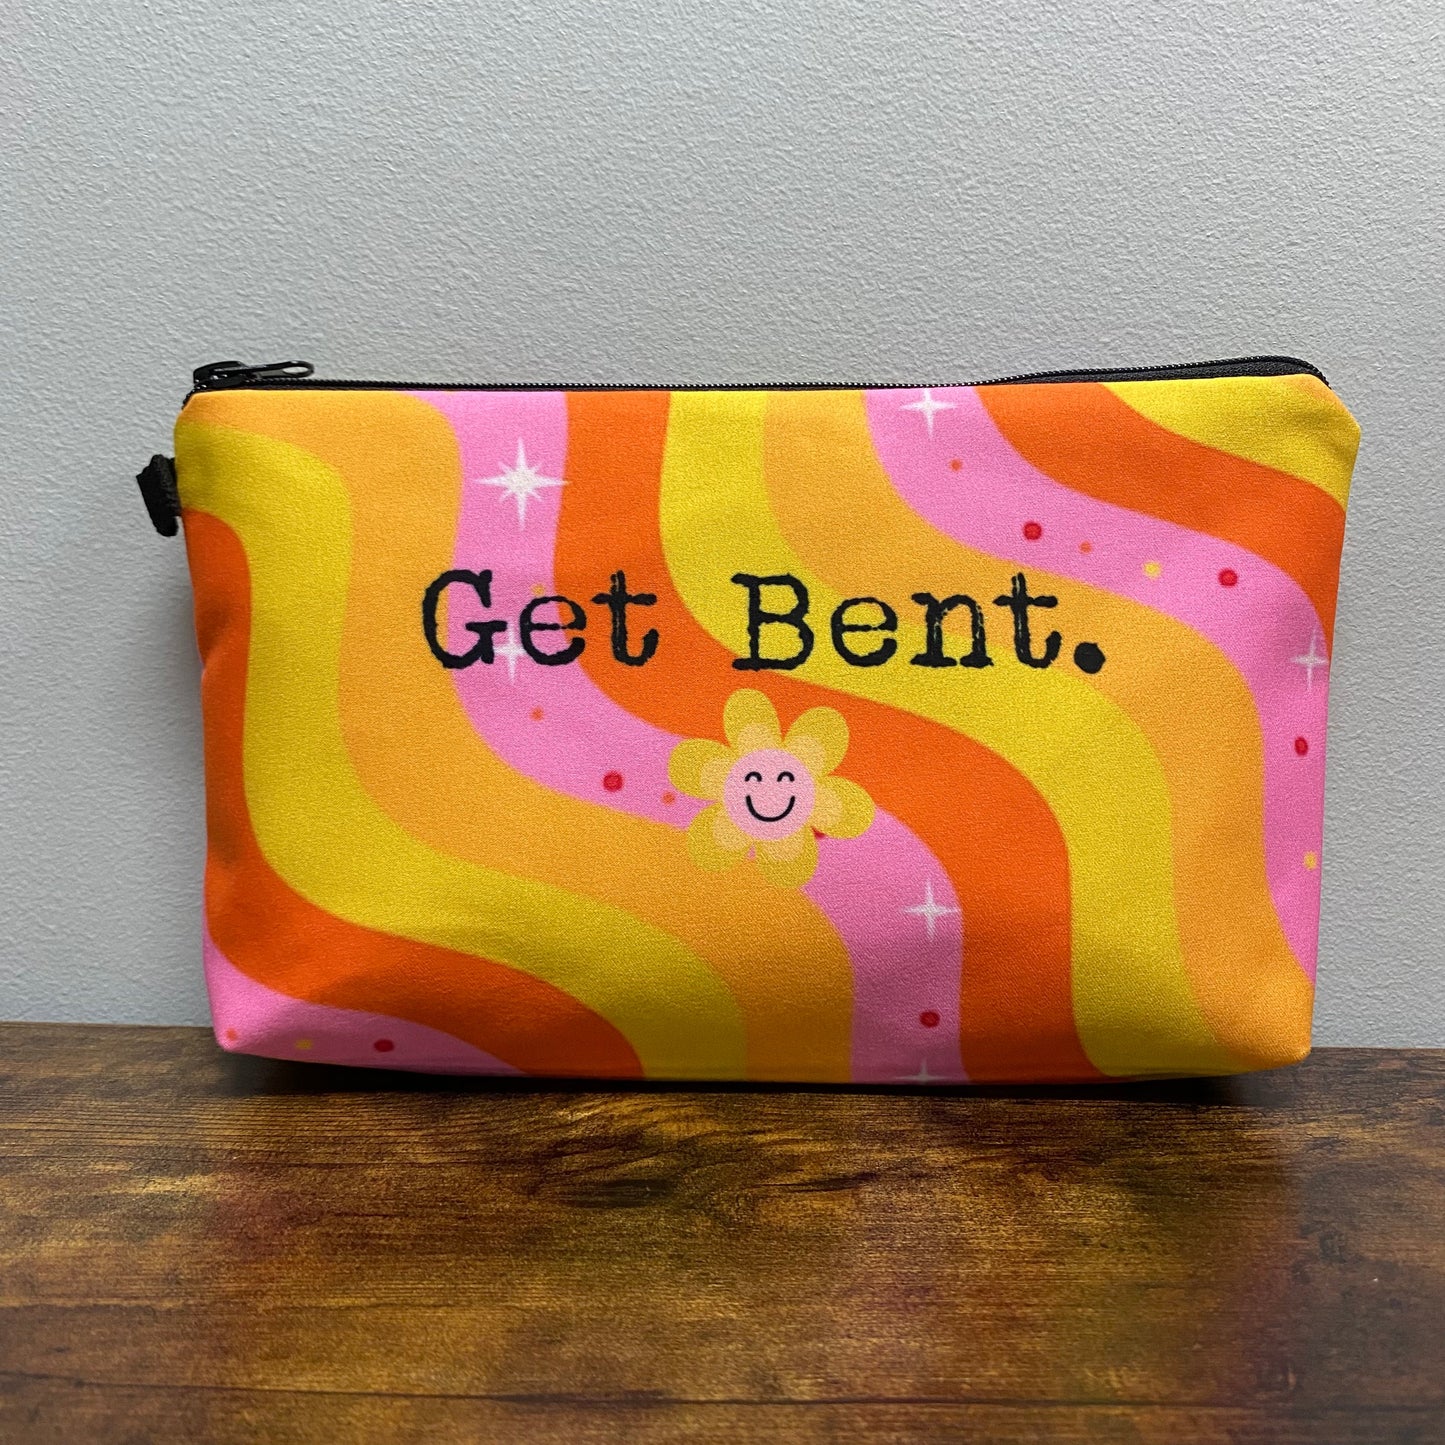 Get Bent - Water-Resistant Multi-Use Pouch